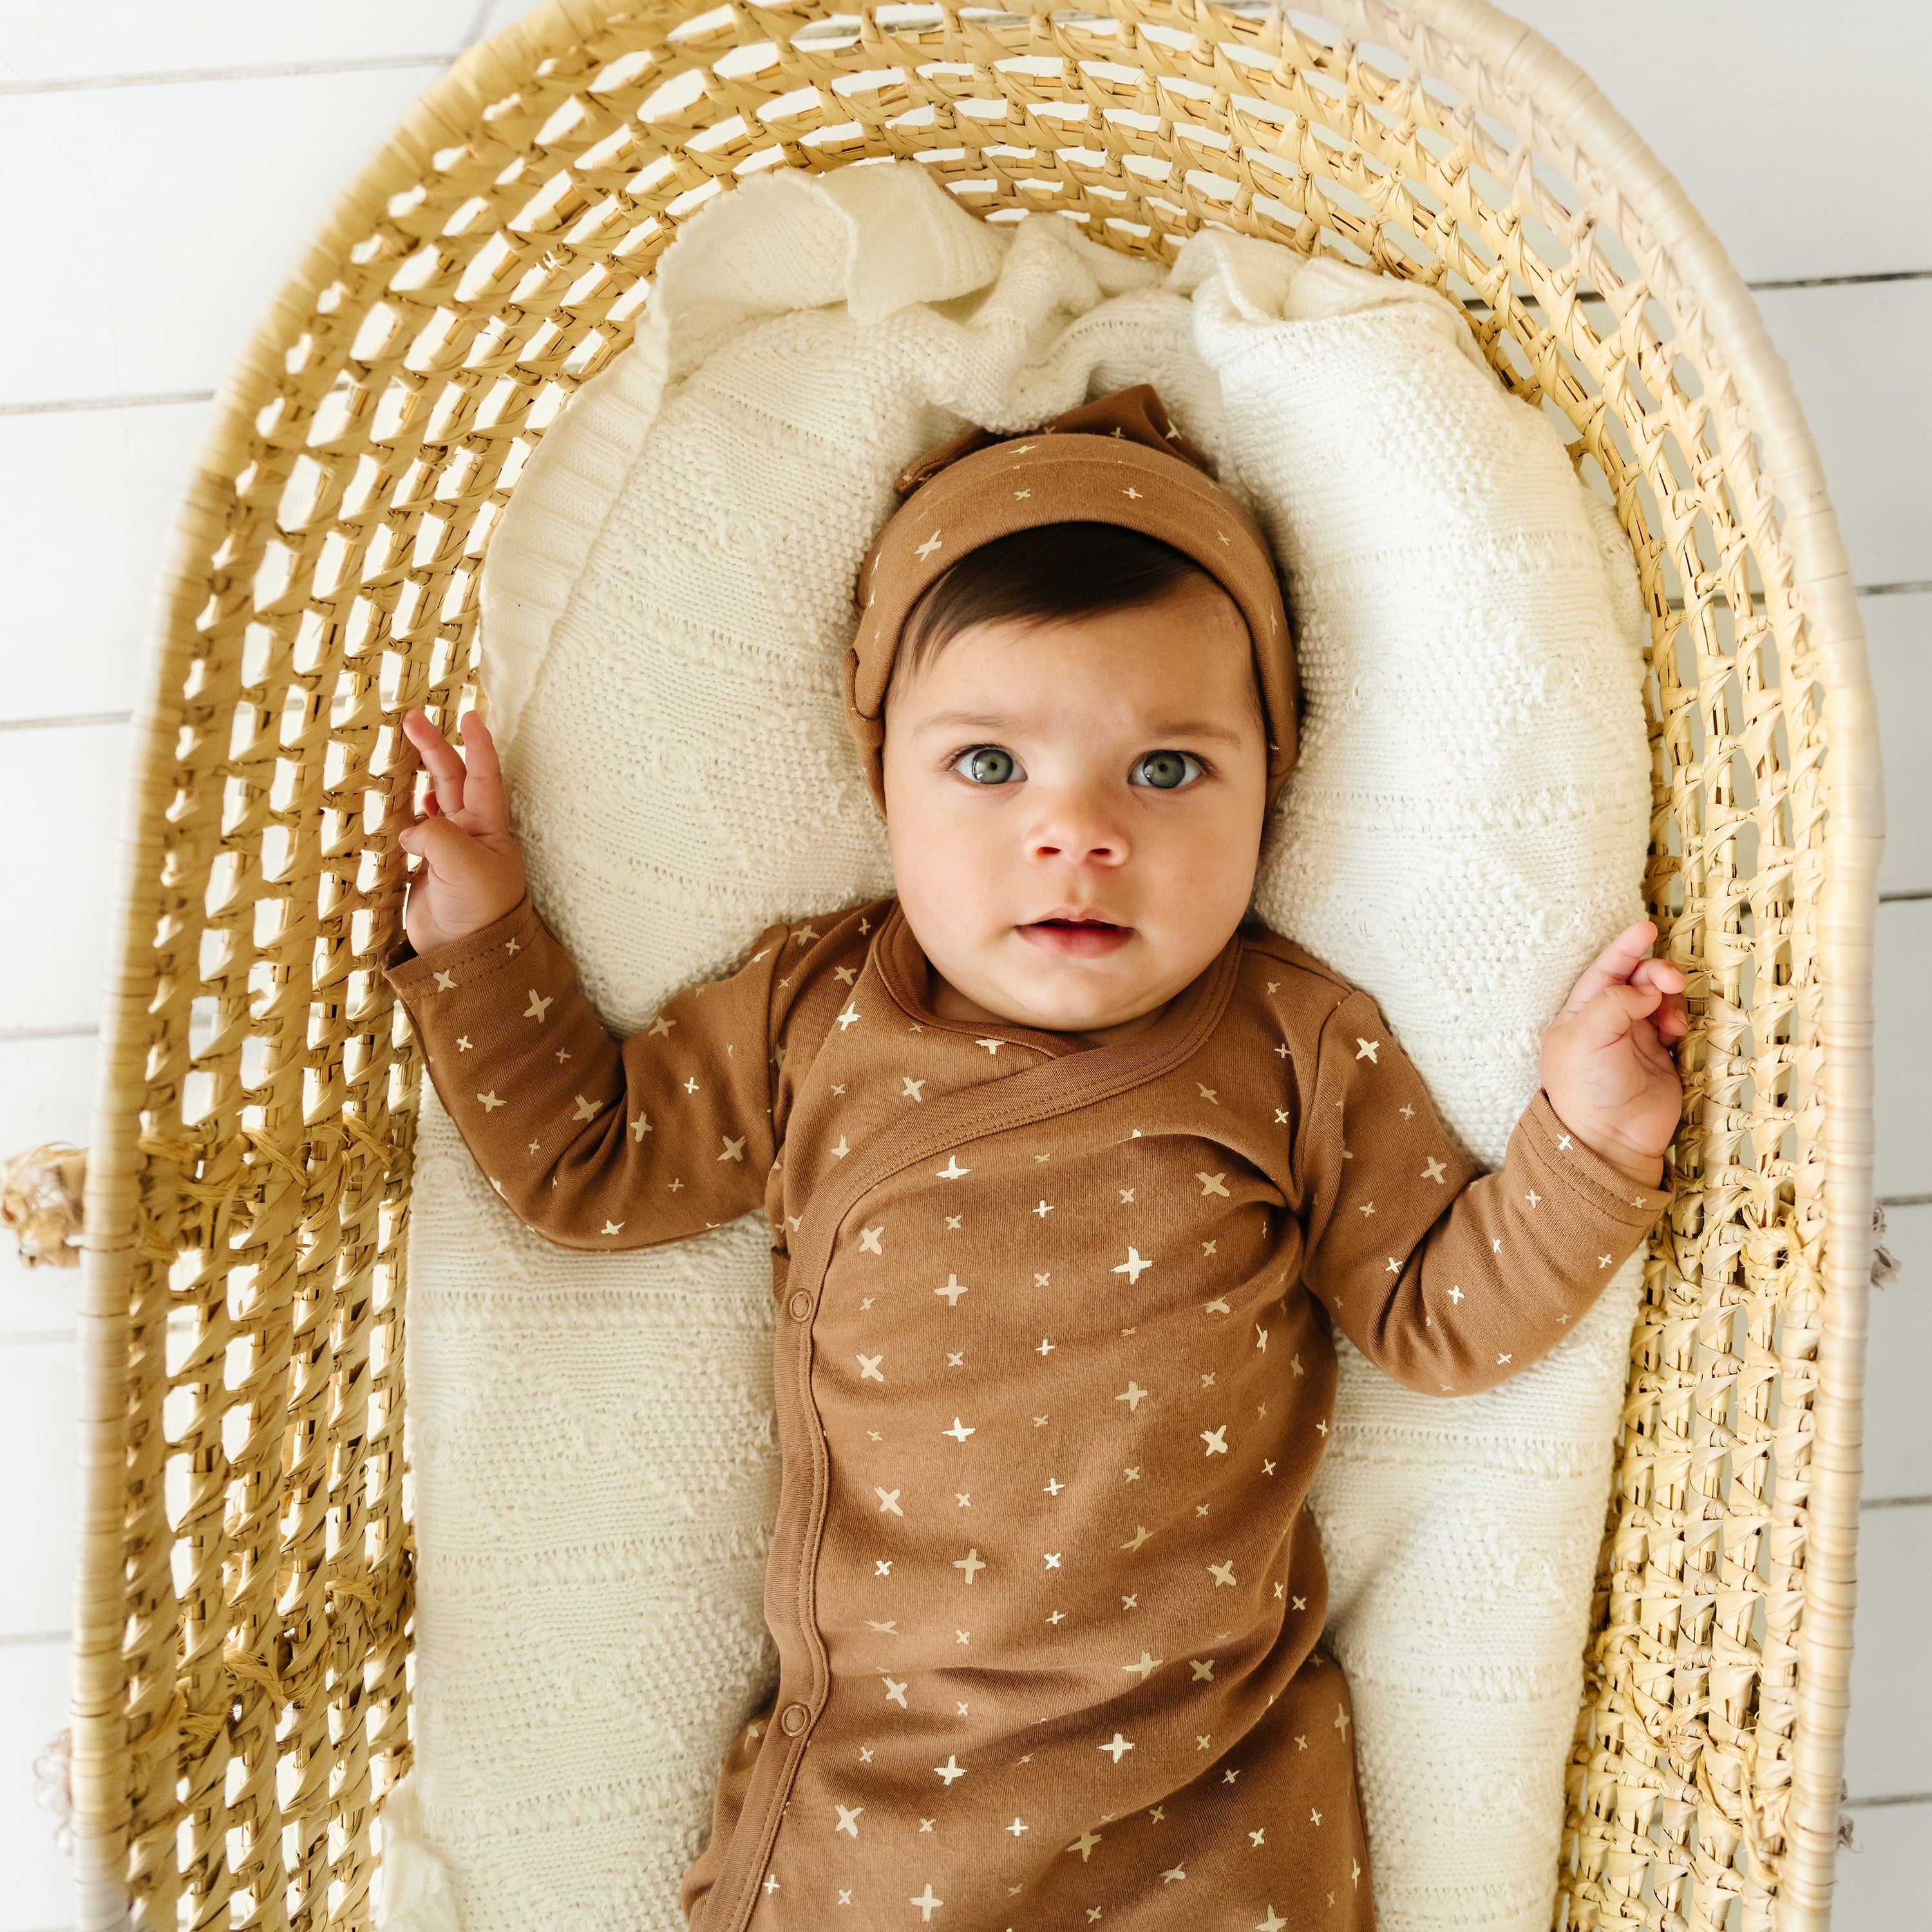 A baby with wide eyes lies in a woven bassinet, wearing a beige onesie from Makemake Organics with gold stars, under a cream-colored blanket. The baby is also wearing a matching Organic Baby Organic Kimono Knotted Sleep Gown - Sparkle.